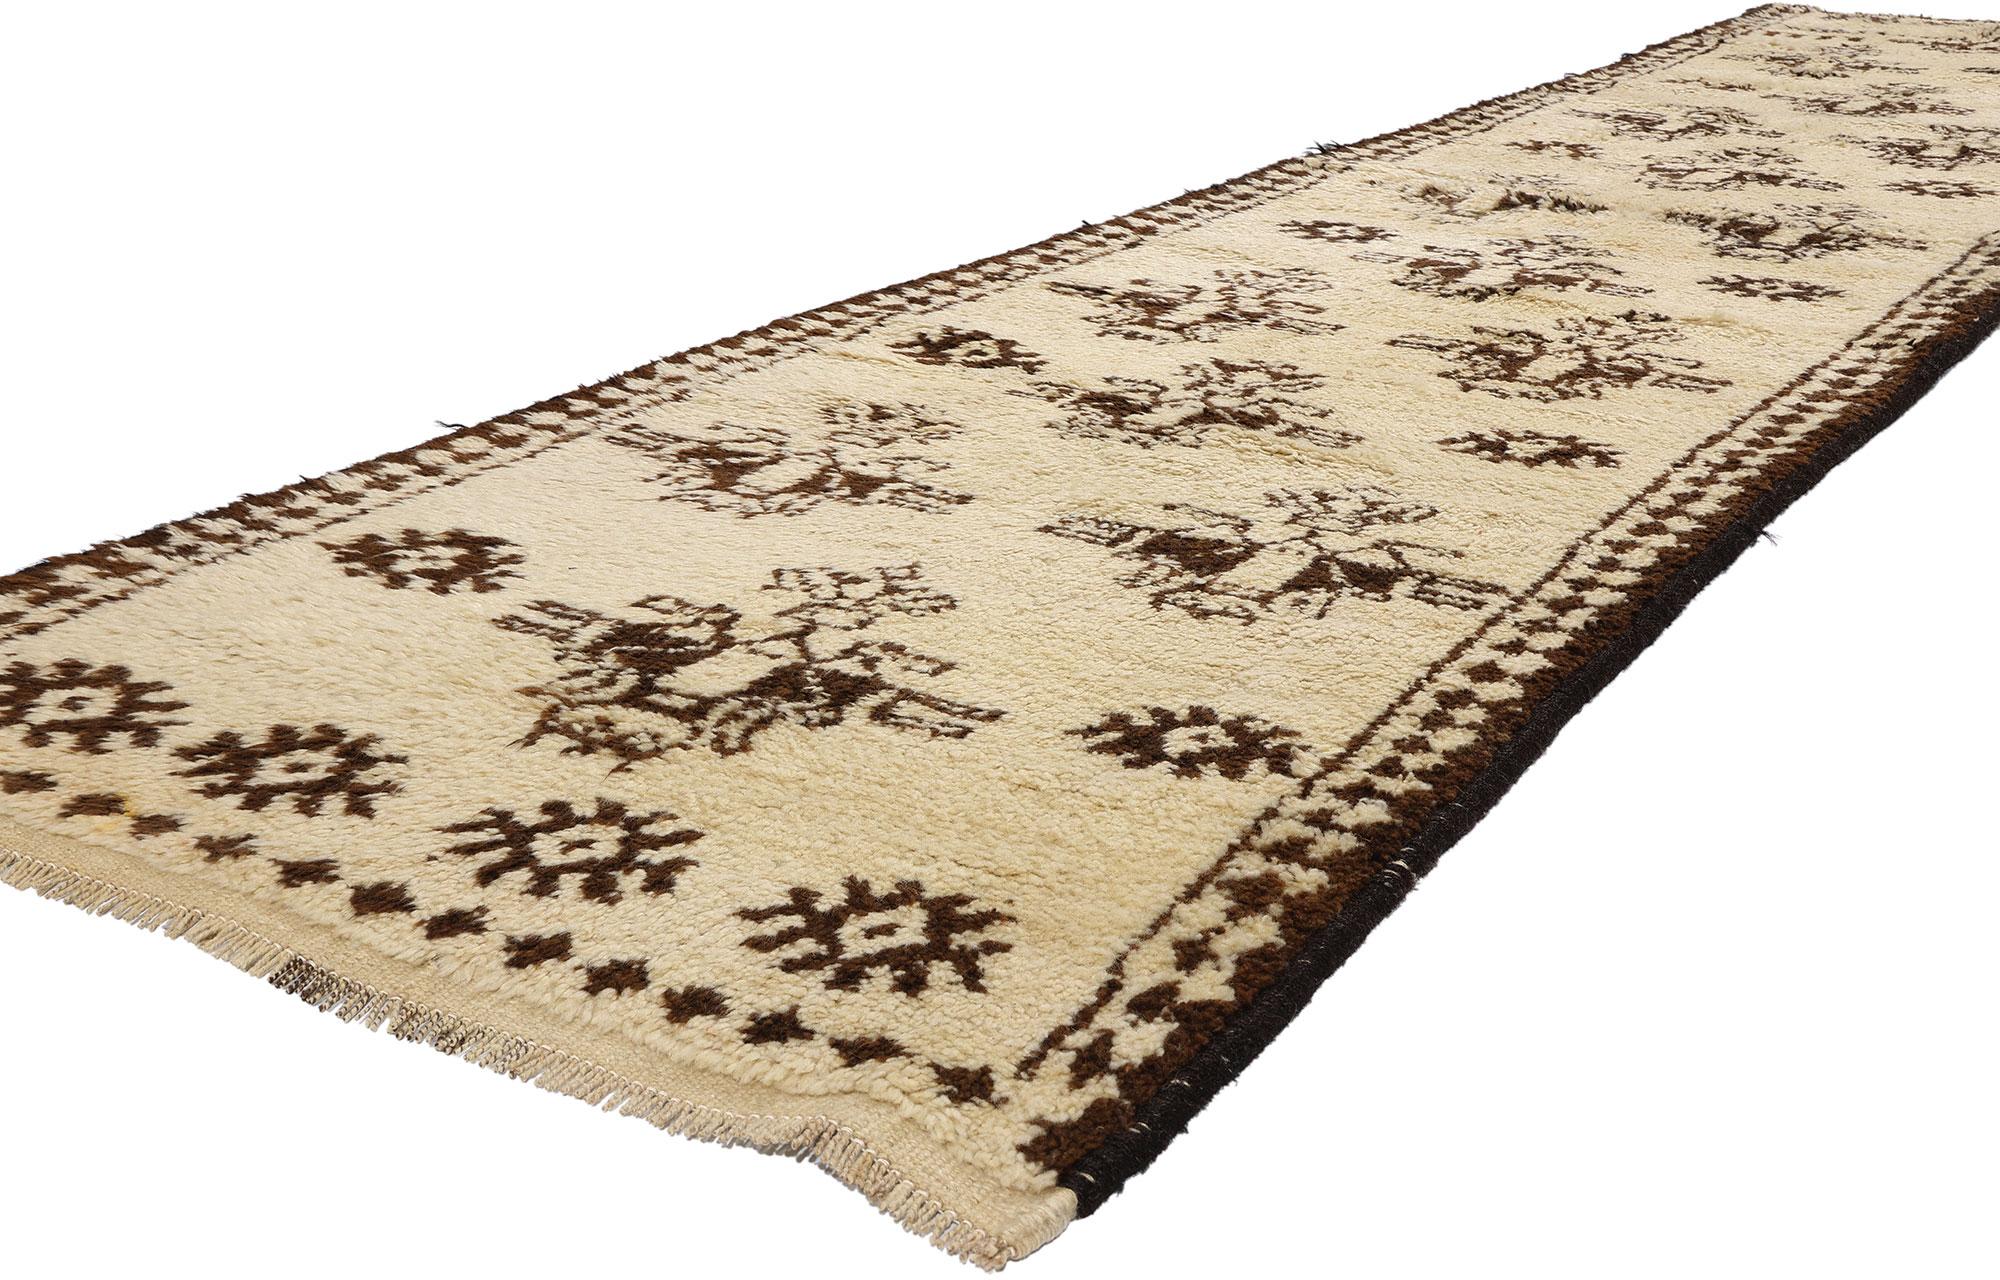 53885 Neutral Vintage Kurdish Rug Runner, 03'04 x 14'06. Kurdish rugs, woven by Kurdish Herki tribes in eastern Turkey, particularly in the Hakkari province, are characterized by geometric motifs and vibrant colors. Handwoven with high-quality wool,